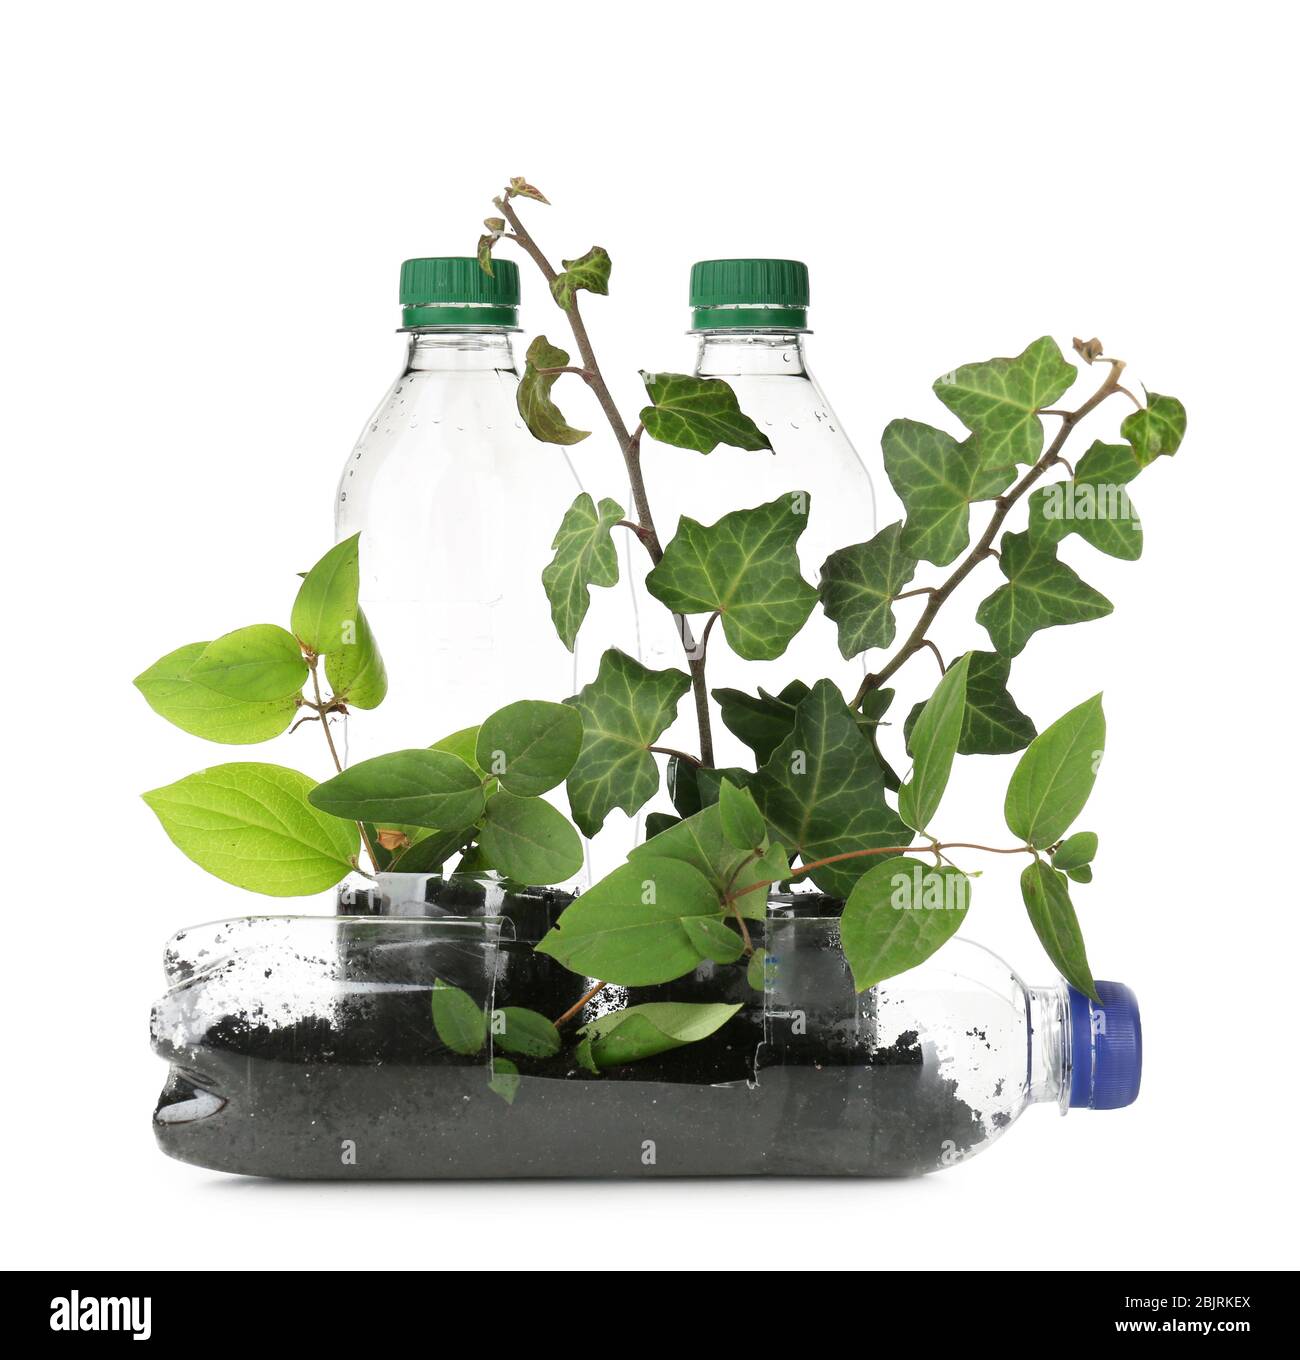 Plastic bottles used as containers for growing plants on white background Stock Photo